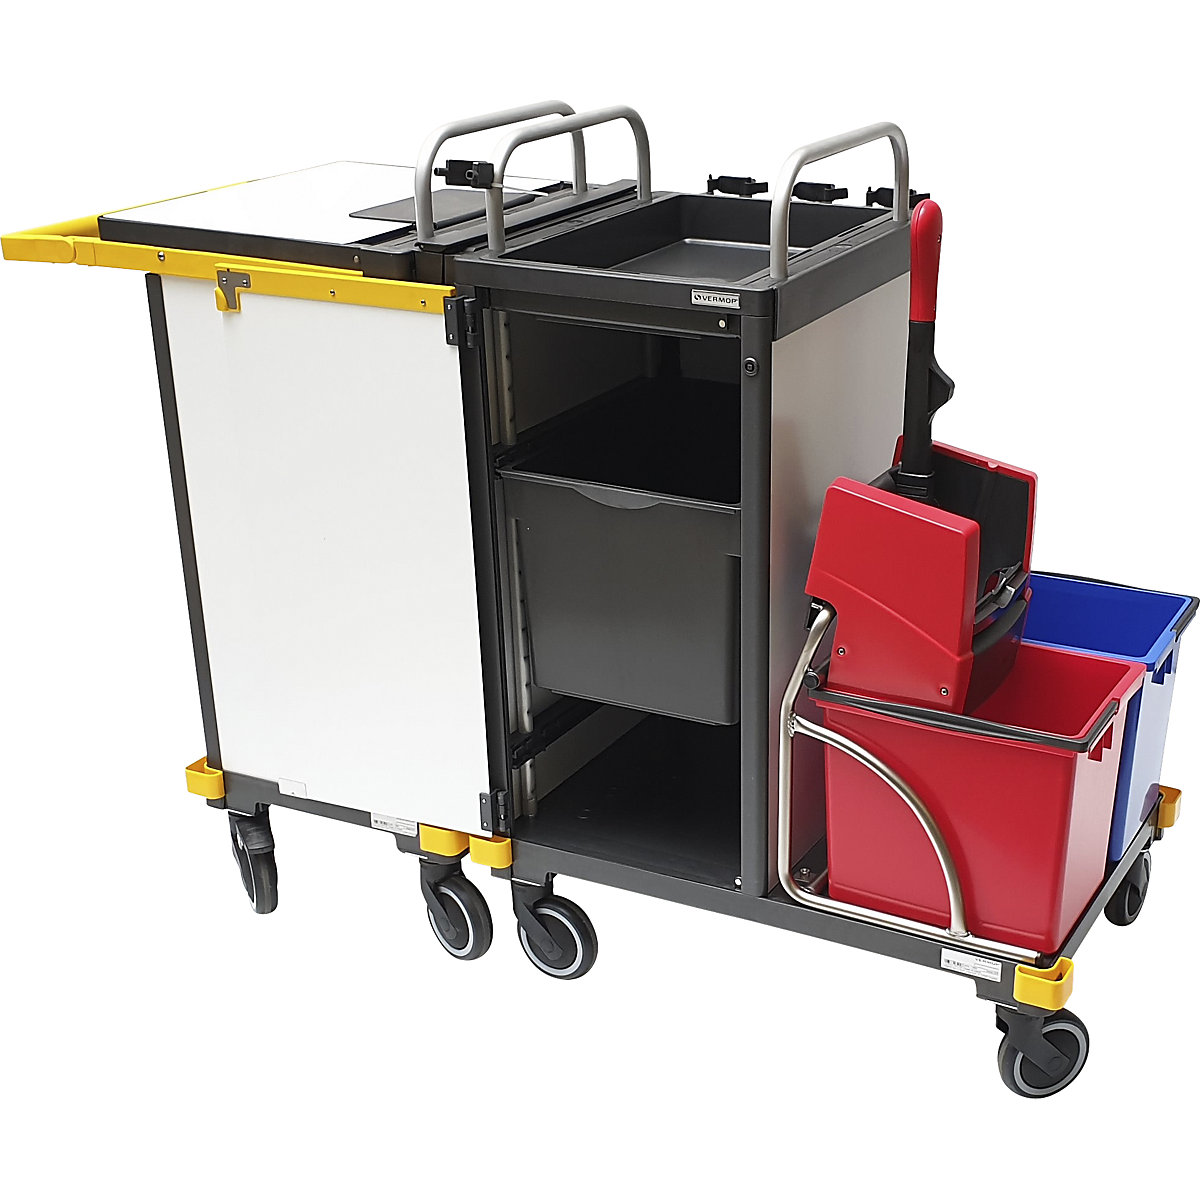 EQUIPE cleaning trolley - Vermop